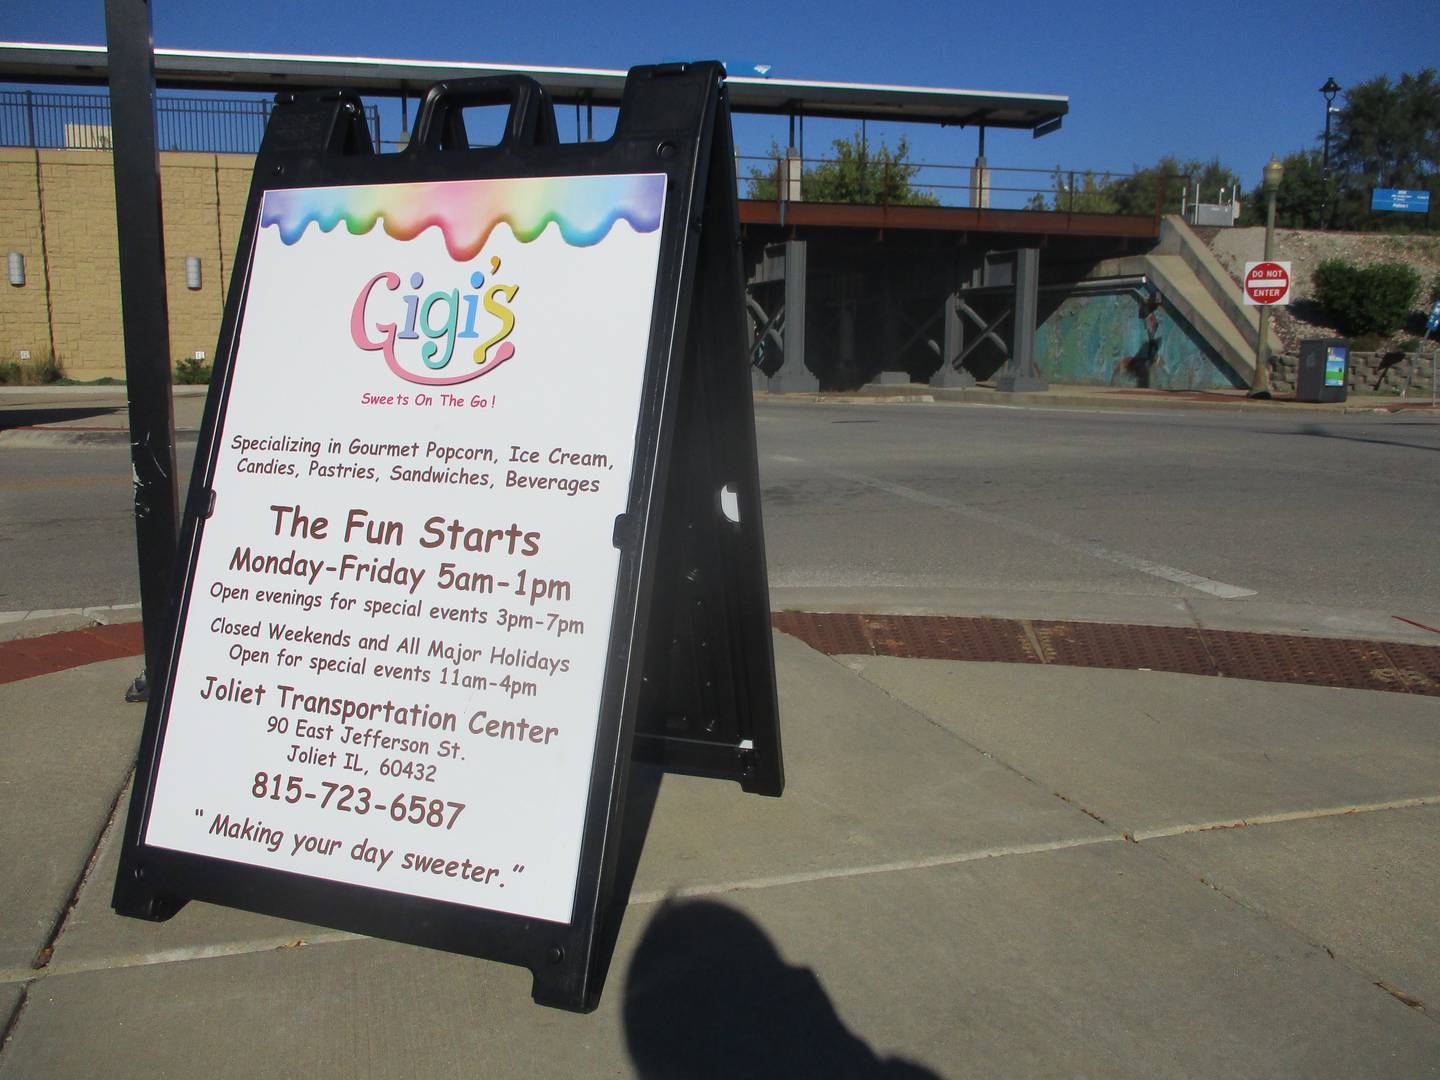 A sign board outside the Gateway Center train station at 90 E. Jefferson St. in Joliet advertises the new Gigi's Sweets on the Go.